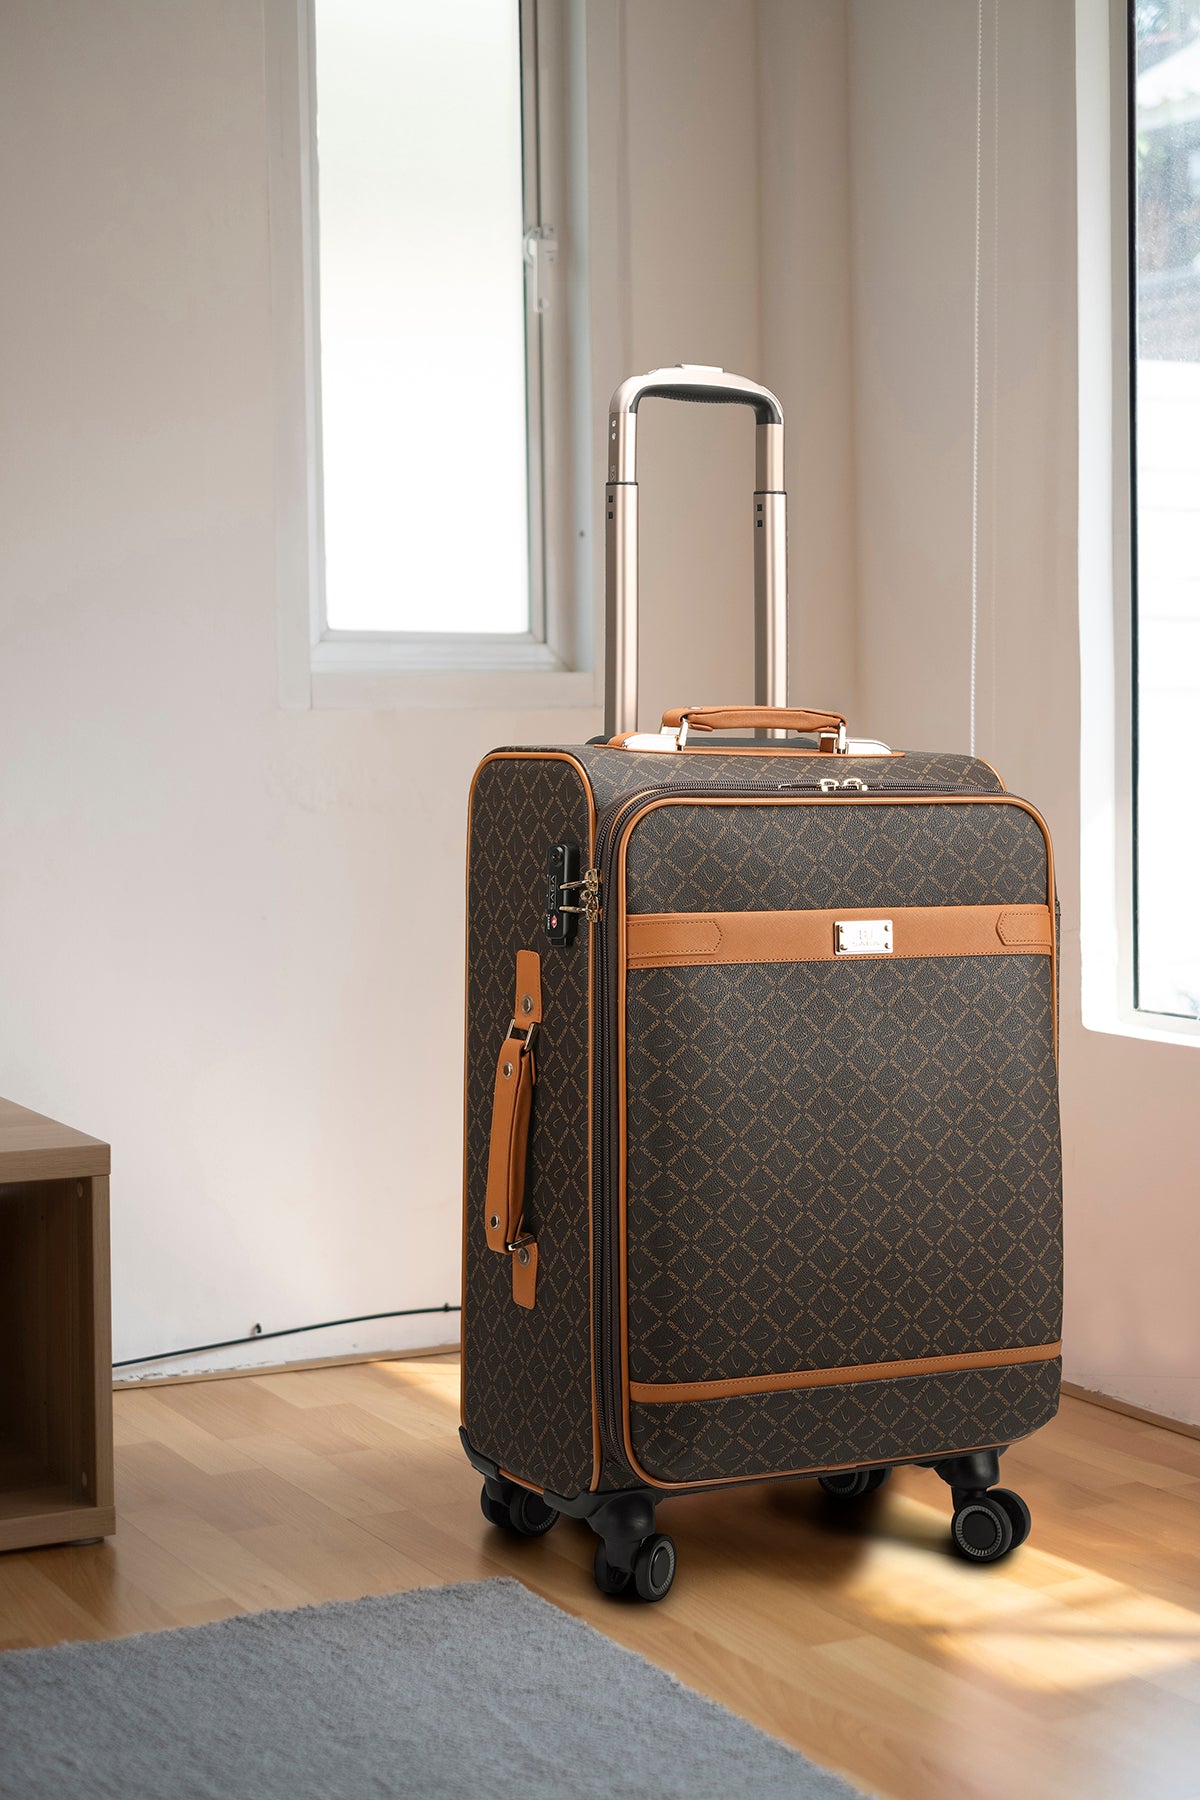 Luxurious travel bags suitcases in several sizes, brown color